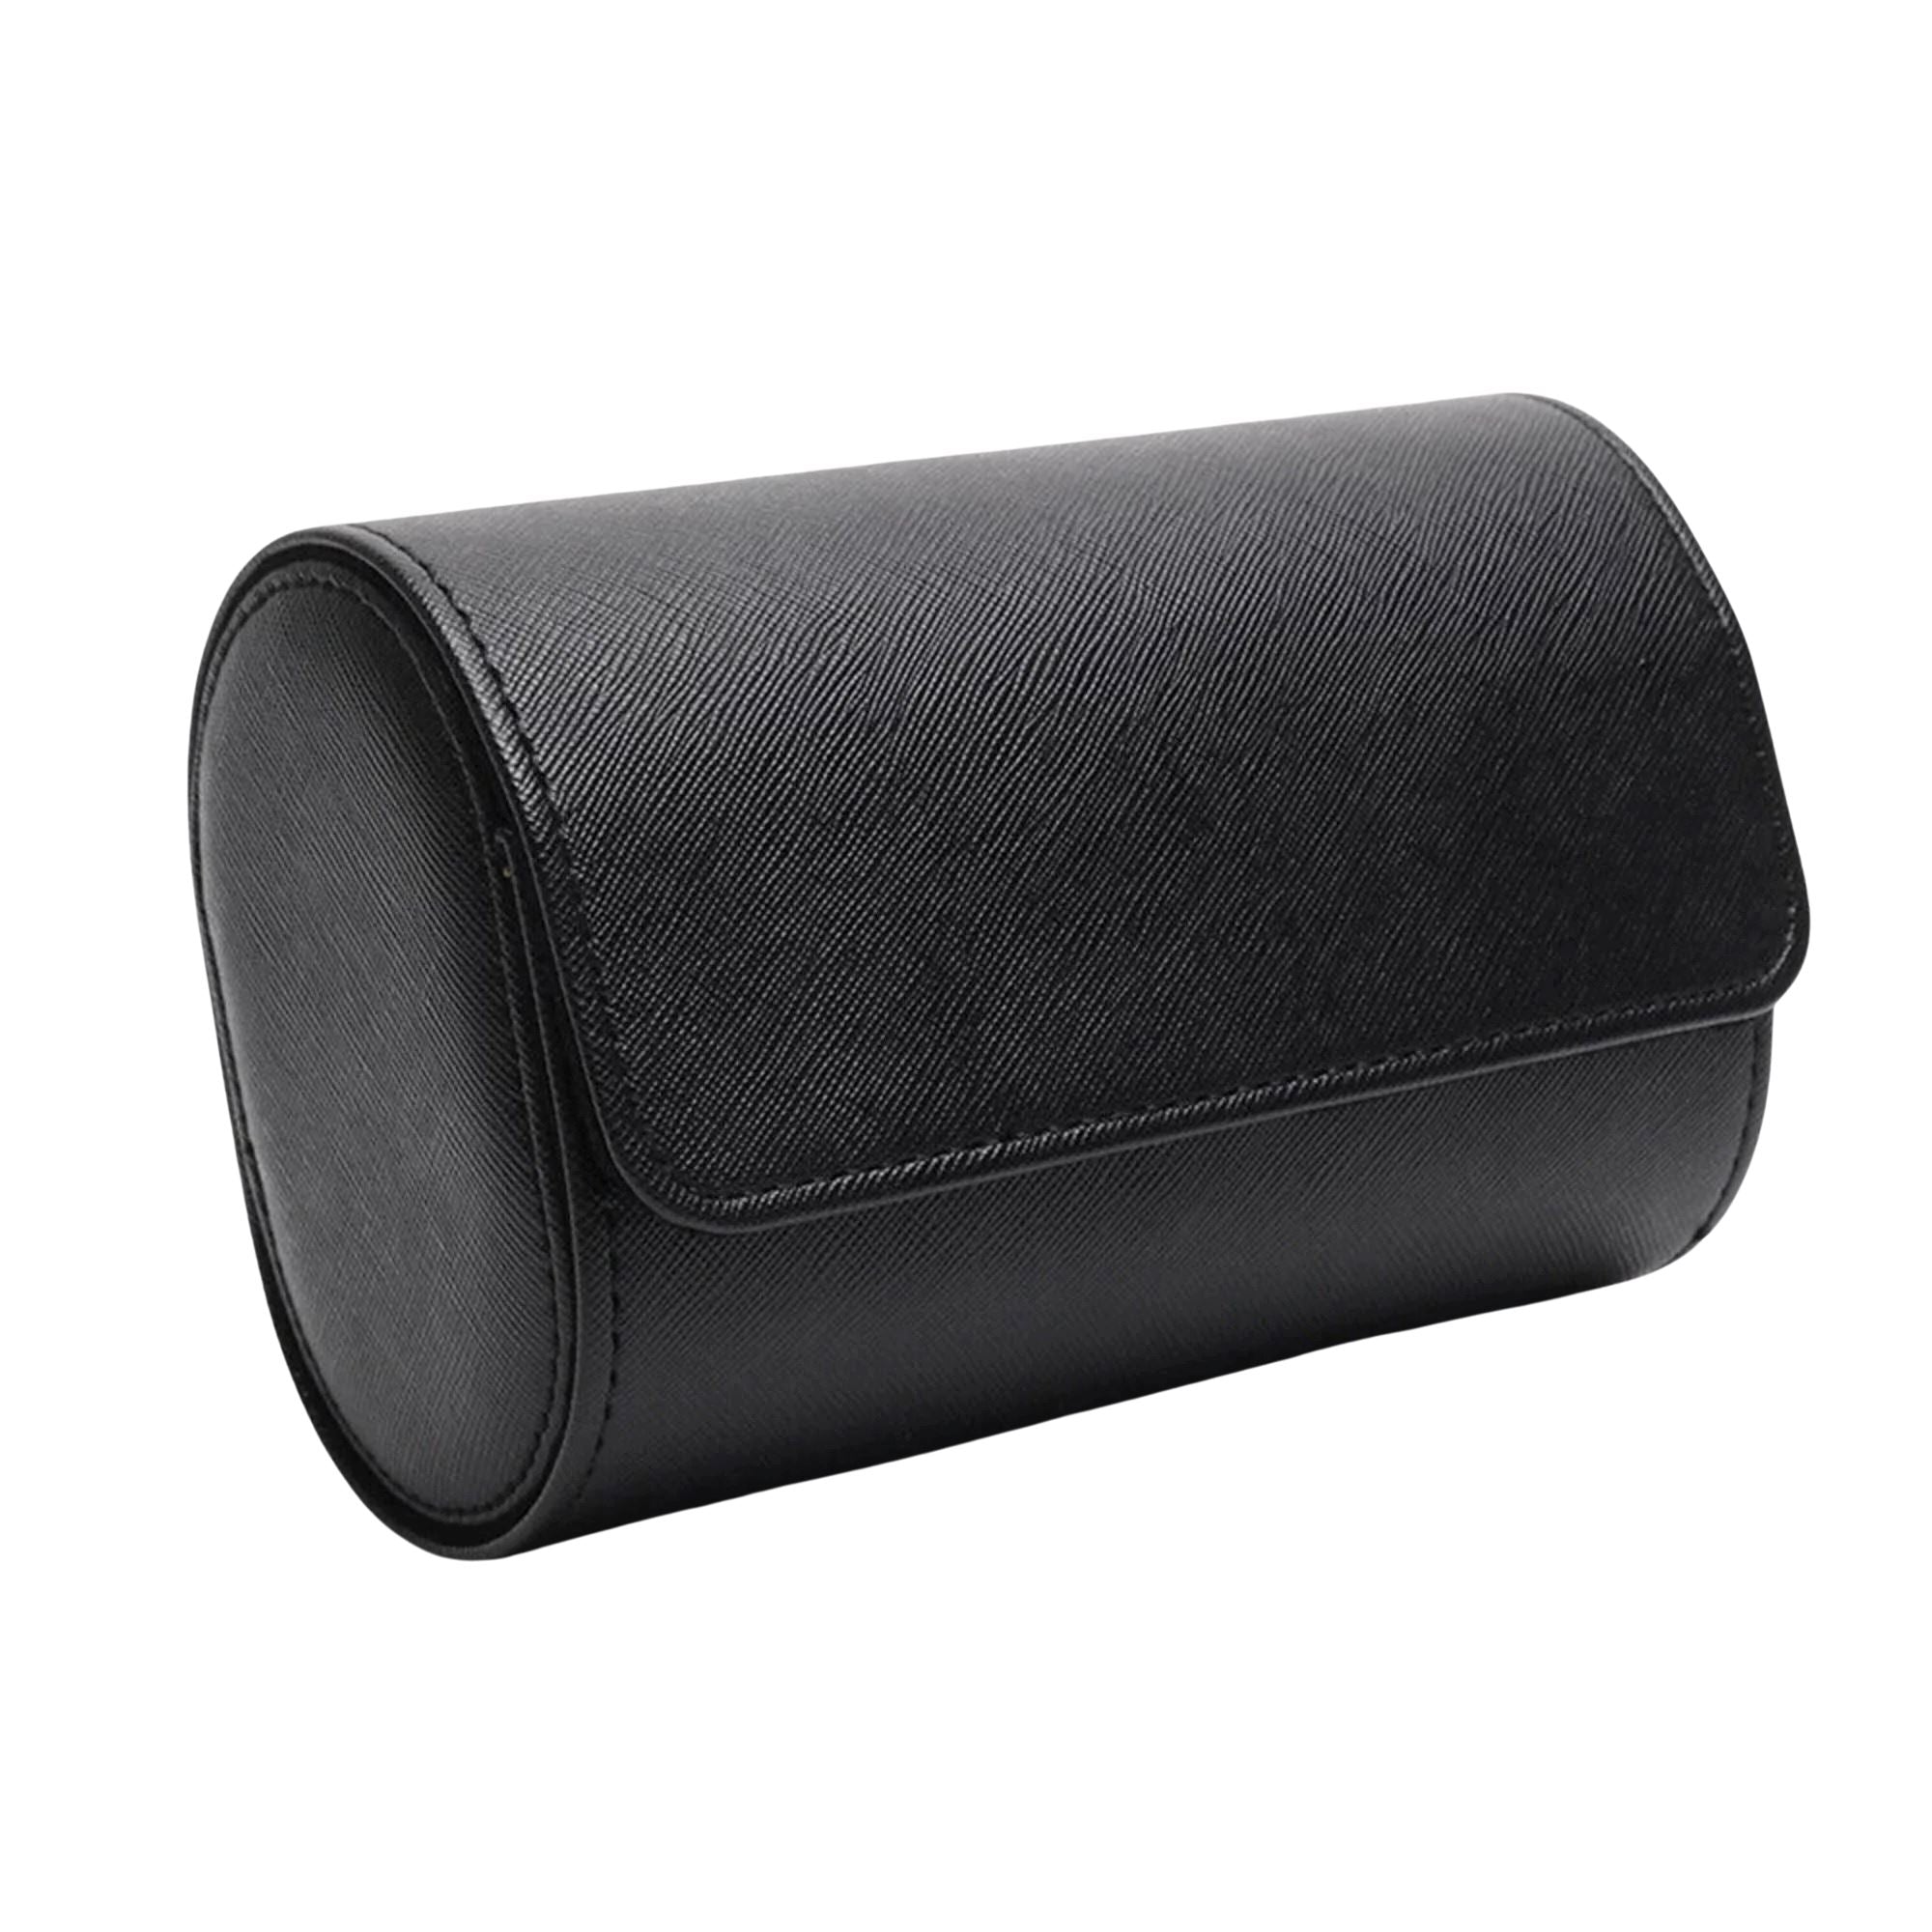 Watch Roll Case for 2 in Black Vegan Leather Watch Boxes Clinks 